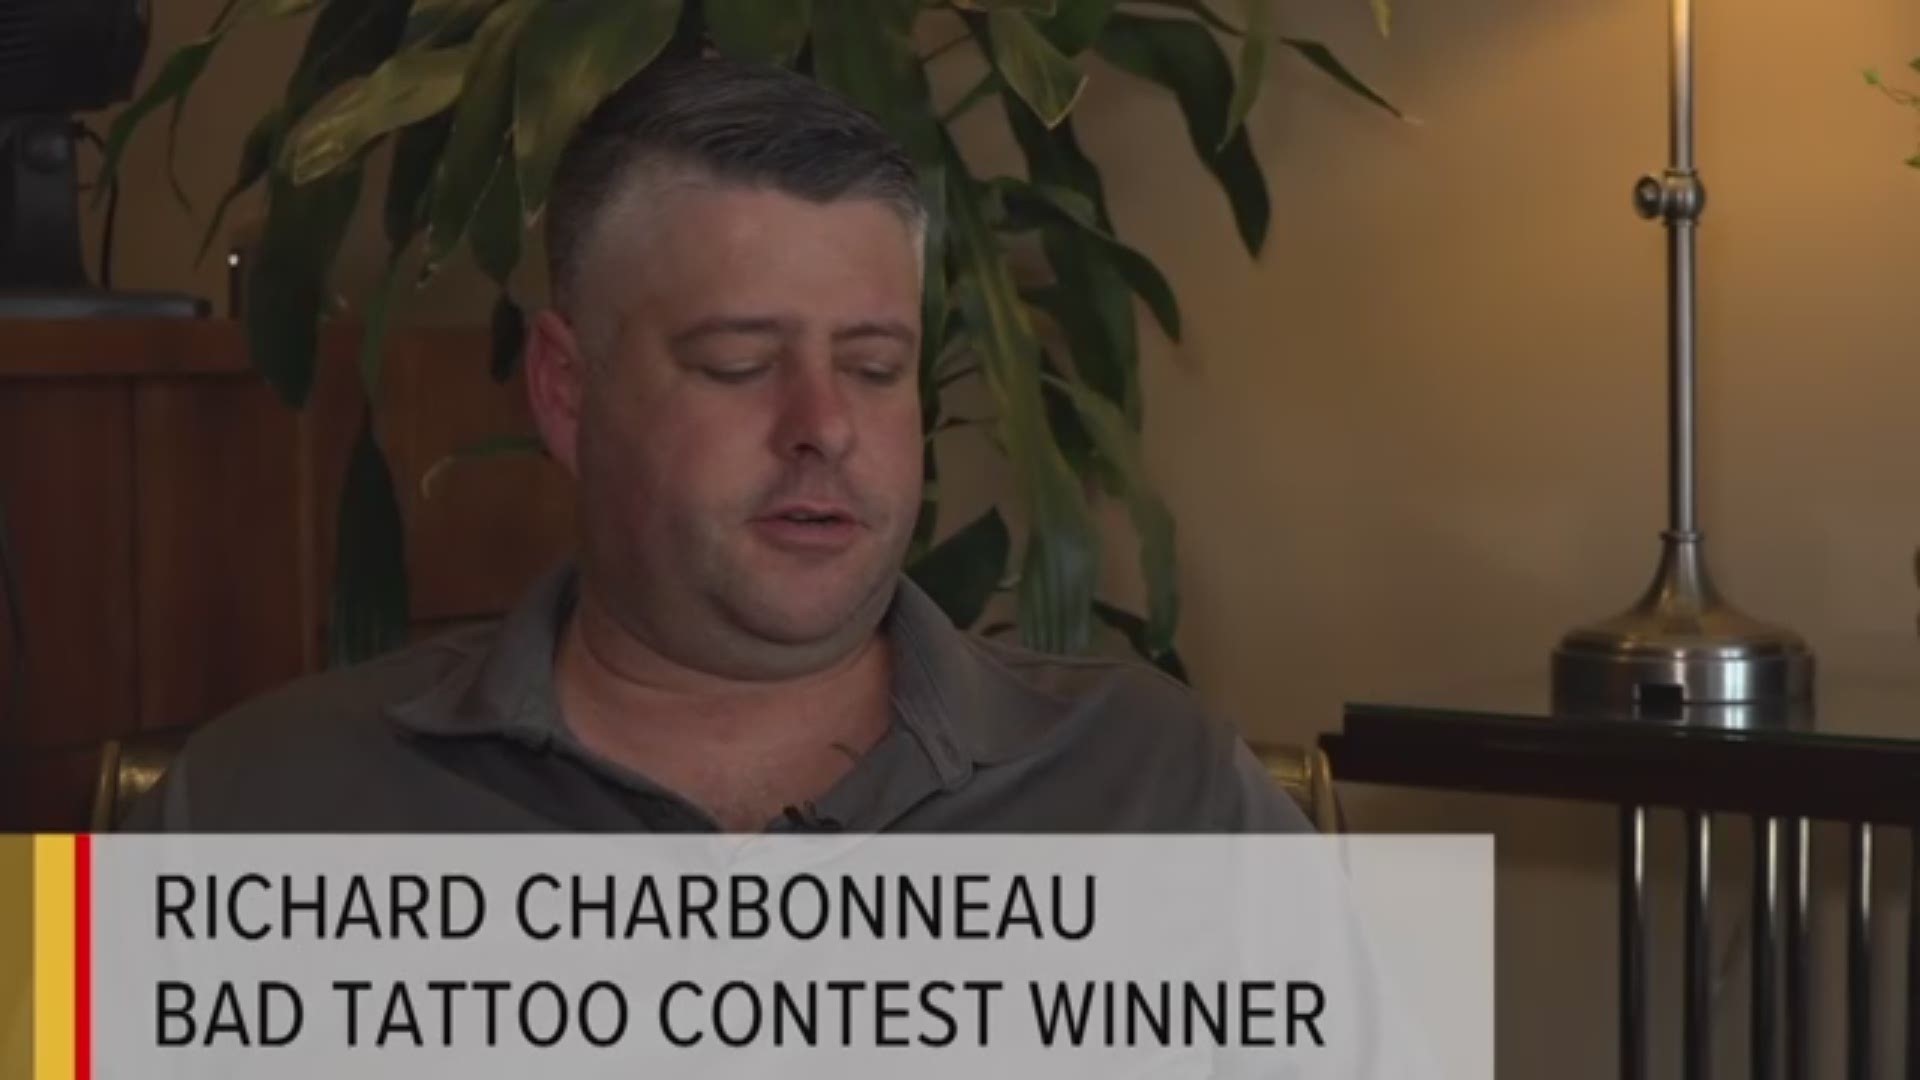 In 2014, he wanted to add to his body of work by getting a 3D tarantula on his hand. The ink eventually started to spread and the spider tattoo turned into a black, indistinct blob. Charbonneau said he could not stand looking at it and attempted to get it covered up. He went with a rose the second time around. And that did not make it look any better.